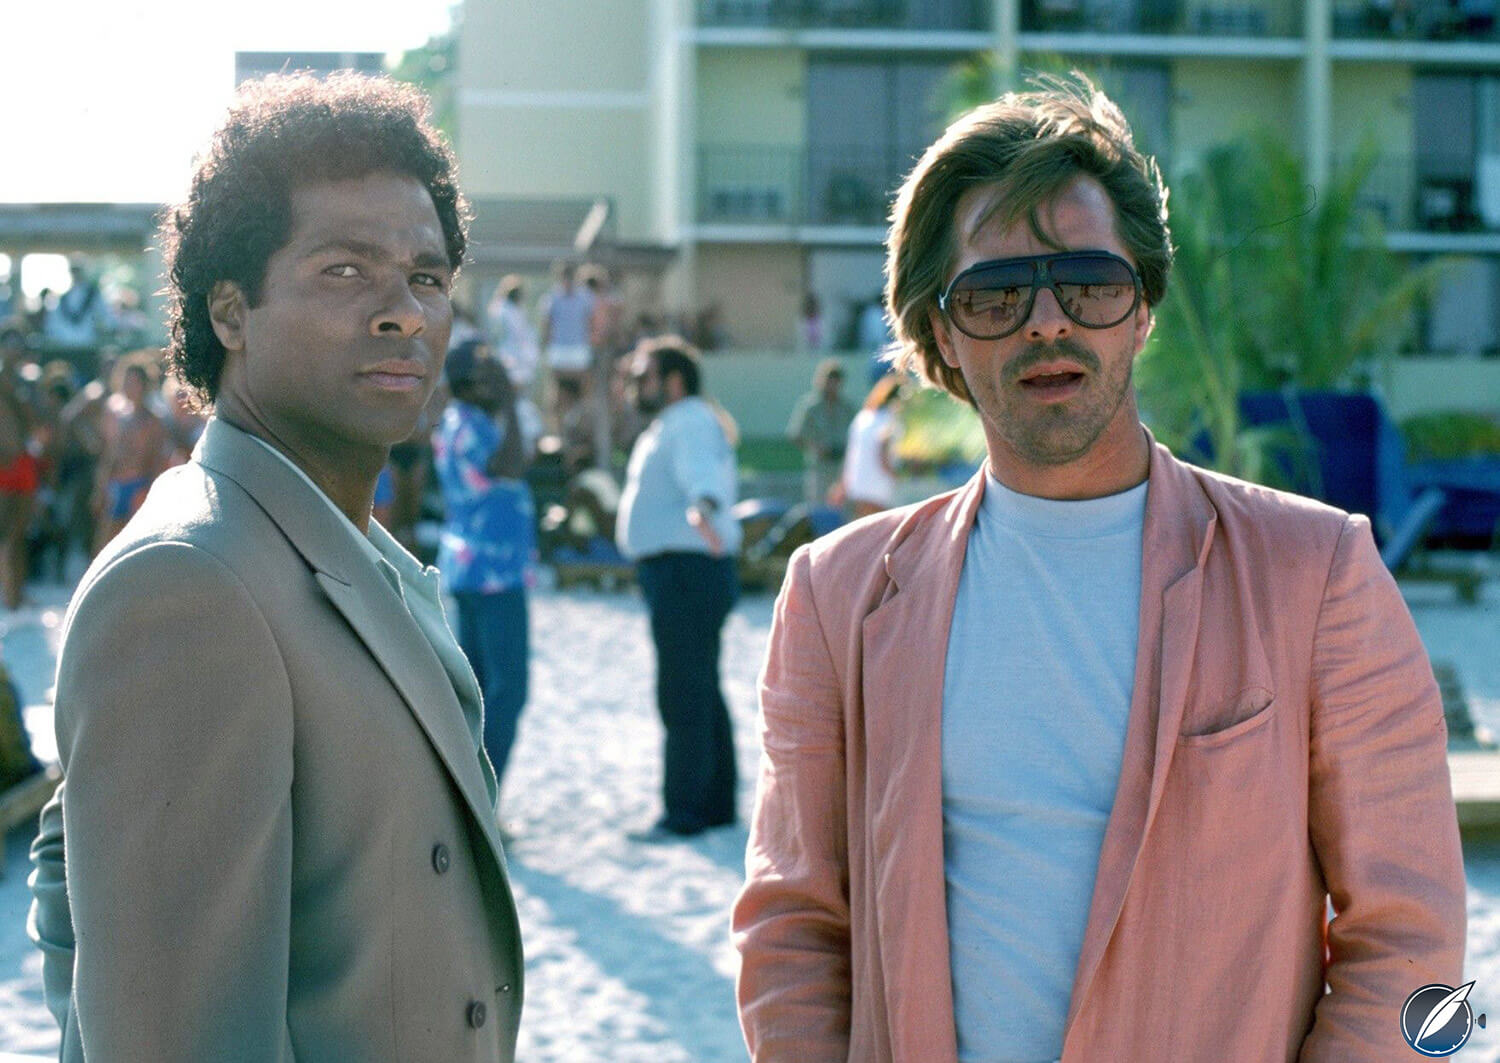 How 1980s: Sonny Crockett (Don Johnson) of ‘Miami Vice’ wearing a salmon-colored blazer